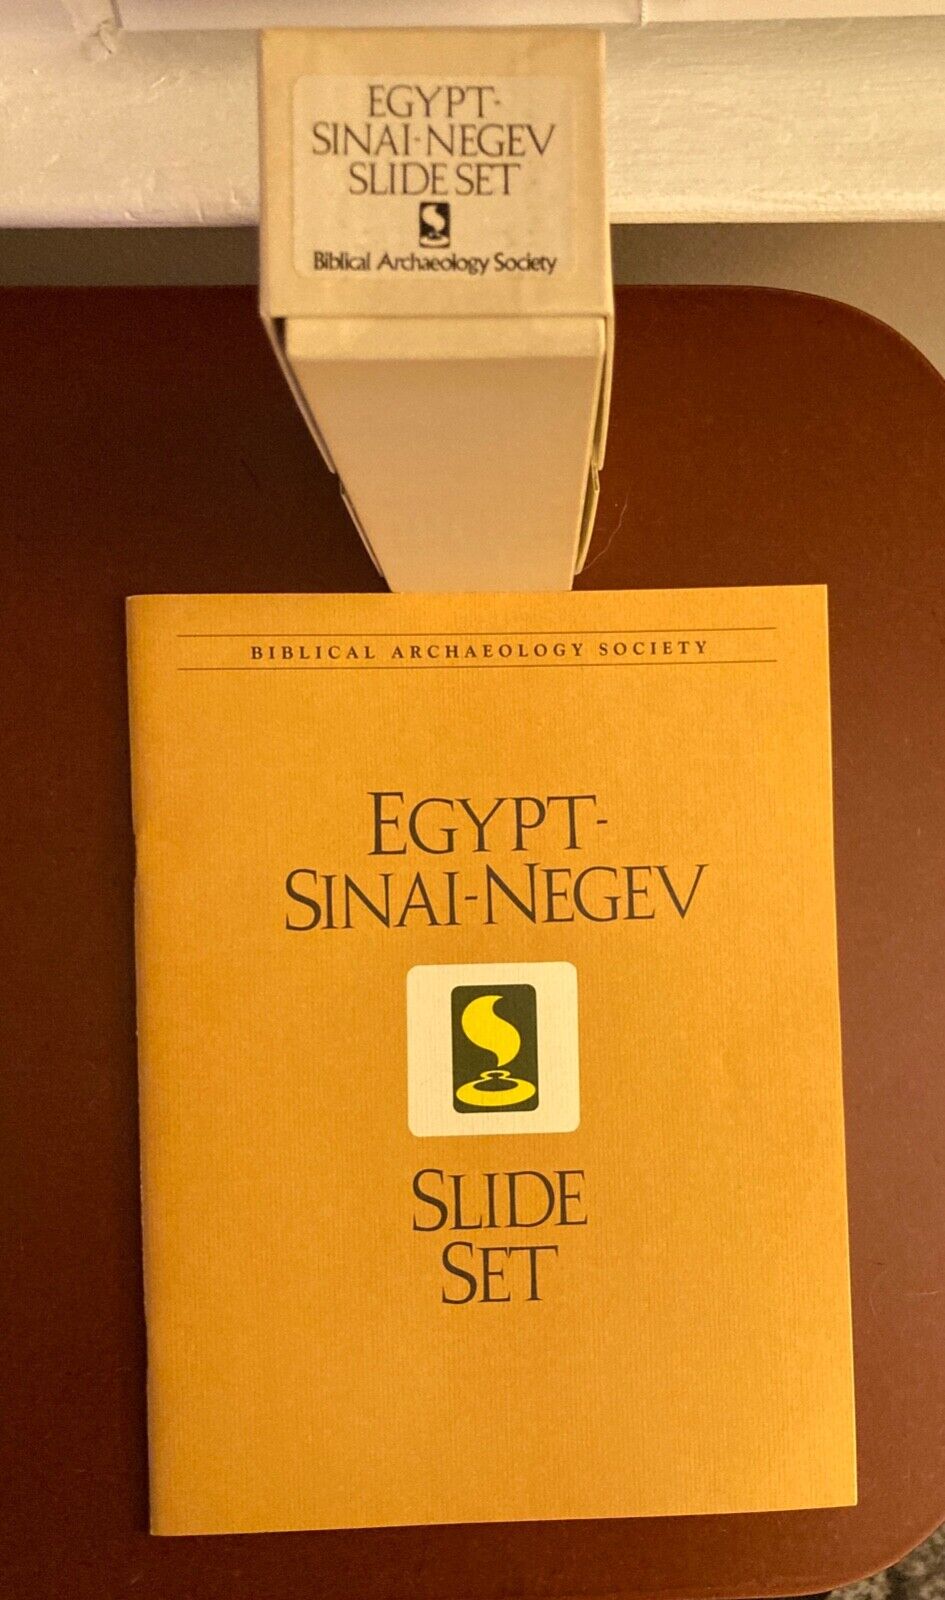 35 MM Biblical Archaeology Society 142 Slide Set  Egypt-Sinai-Negev with guide.